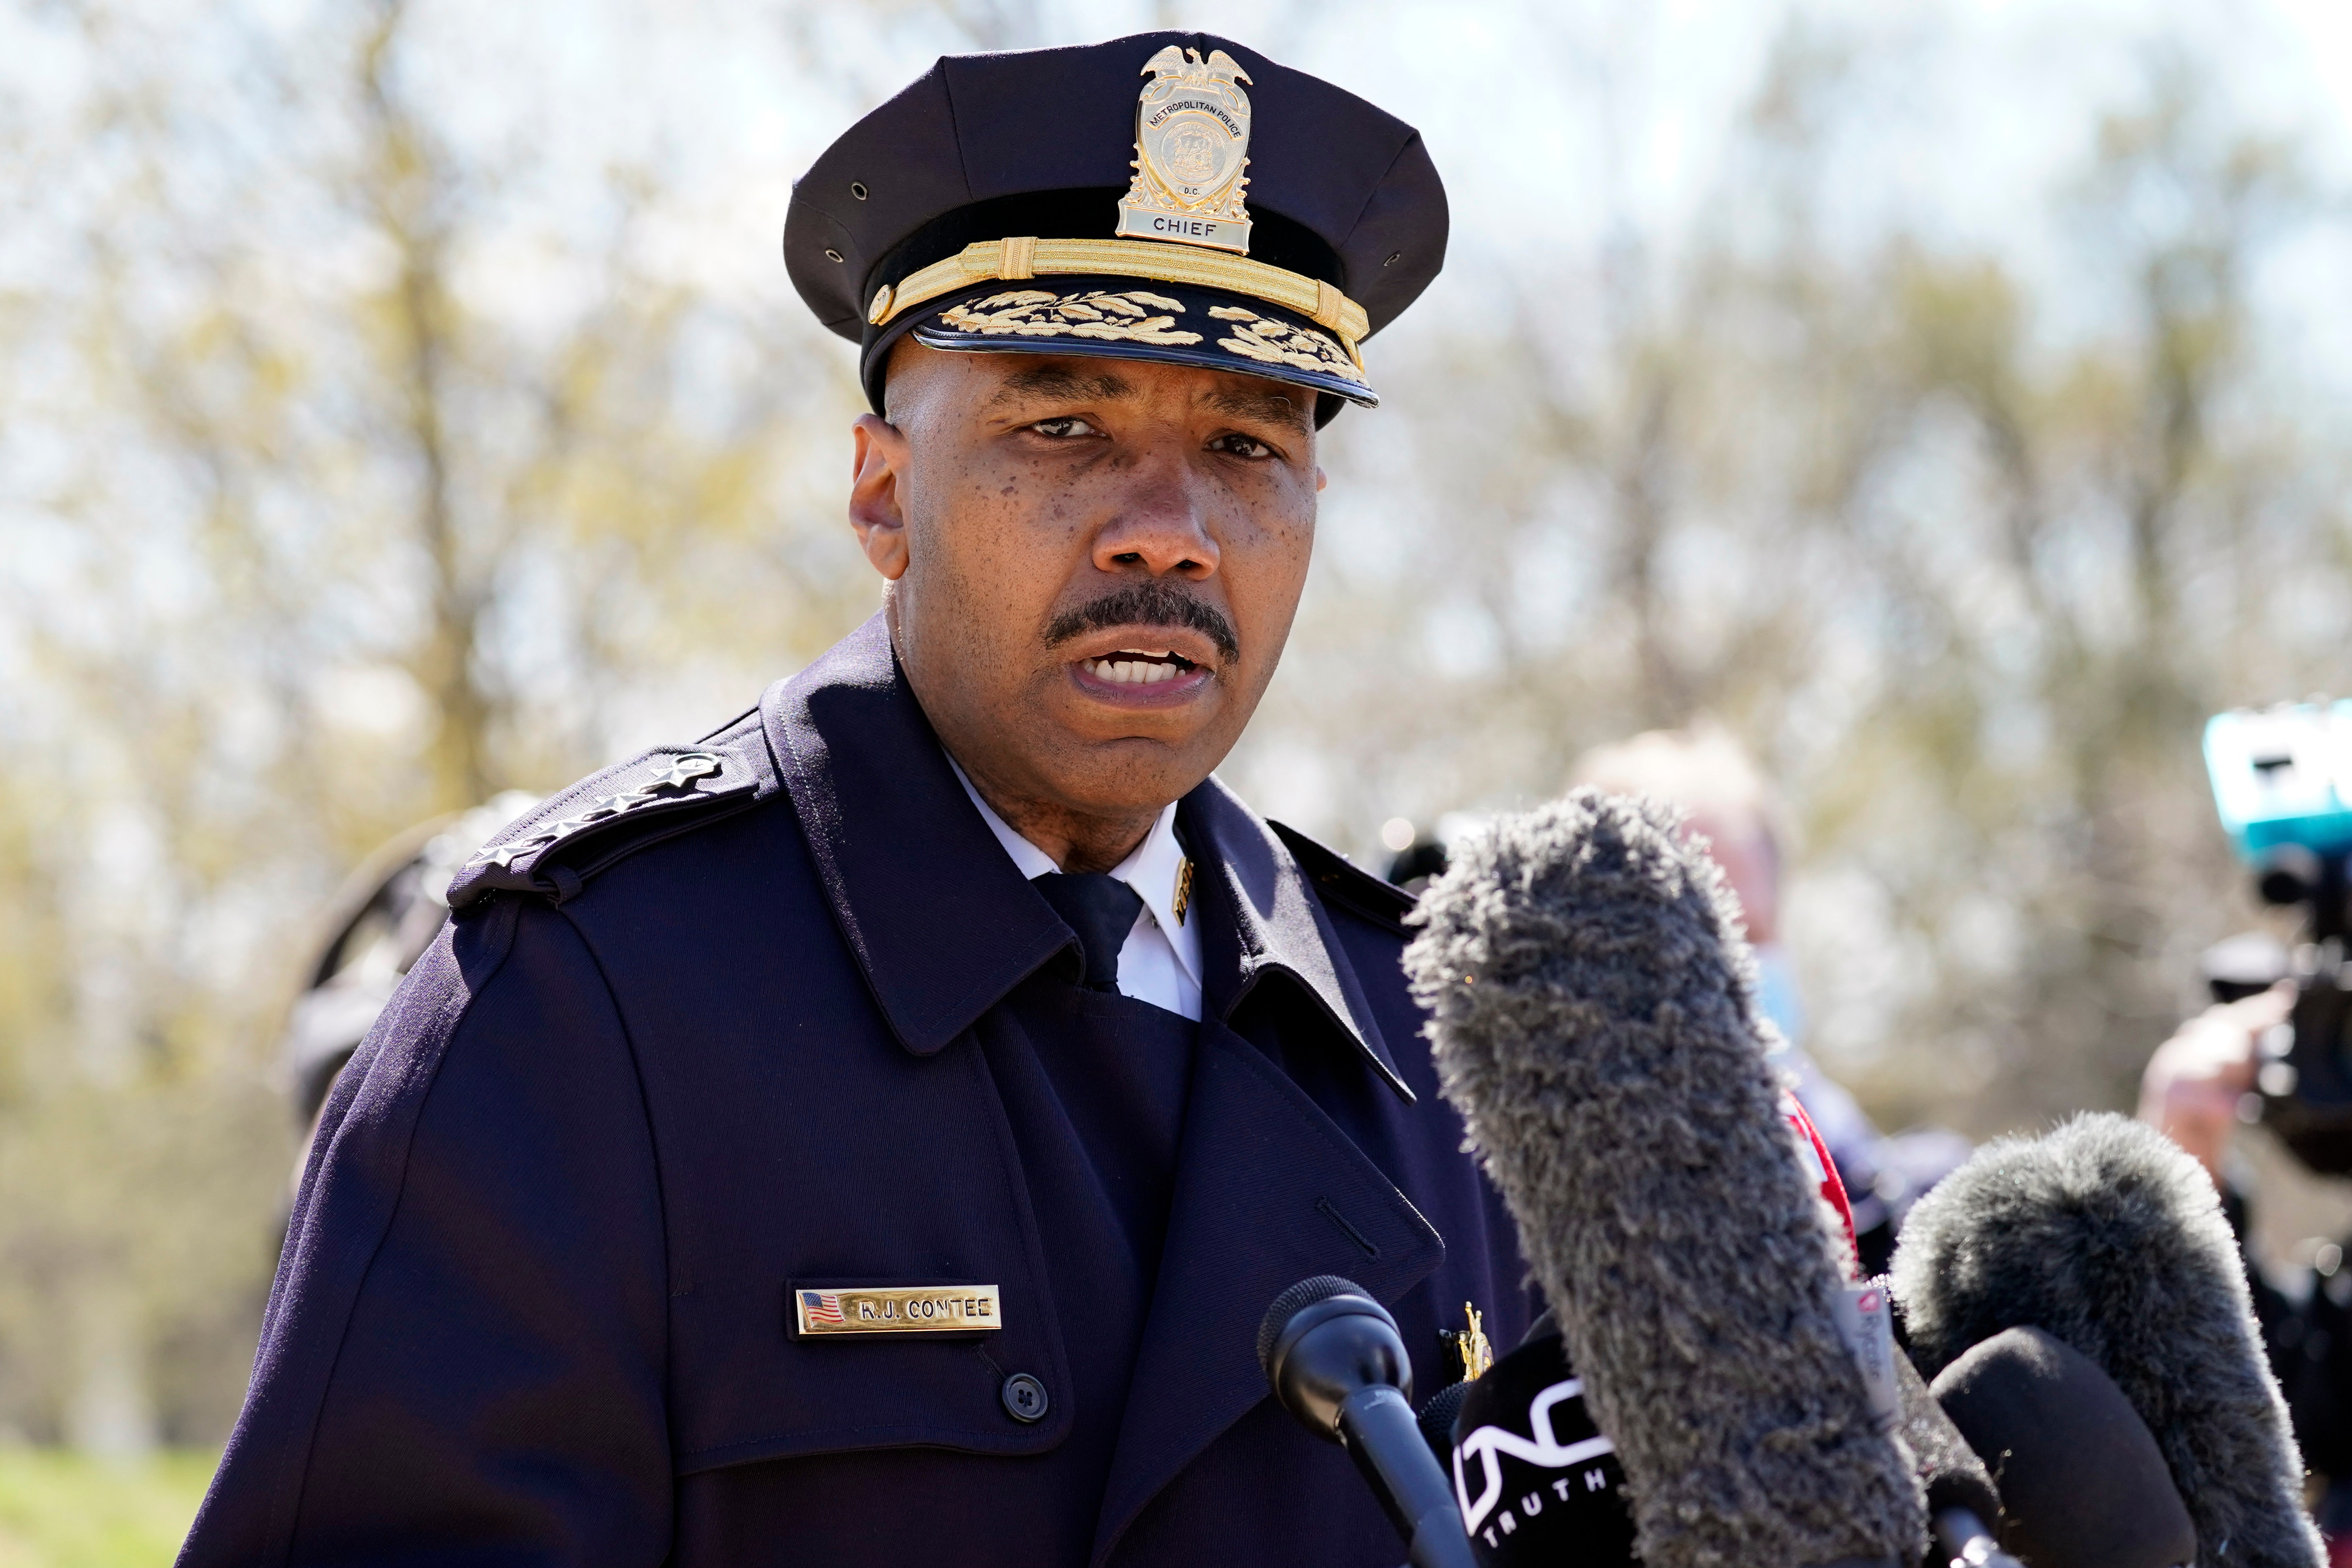 DC police chief blasts justice system after latest shooting: 'You cannot coddle violent criminals'